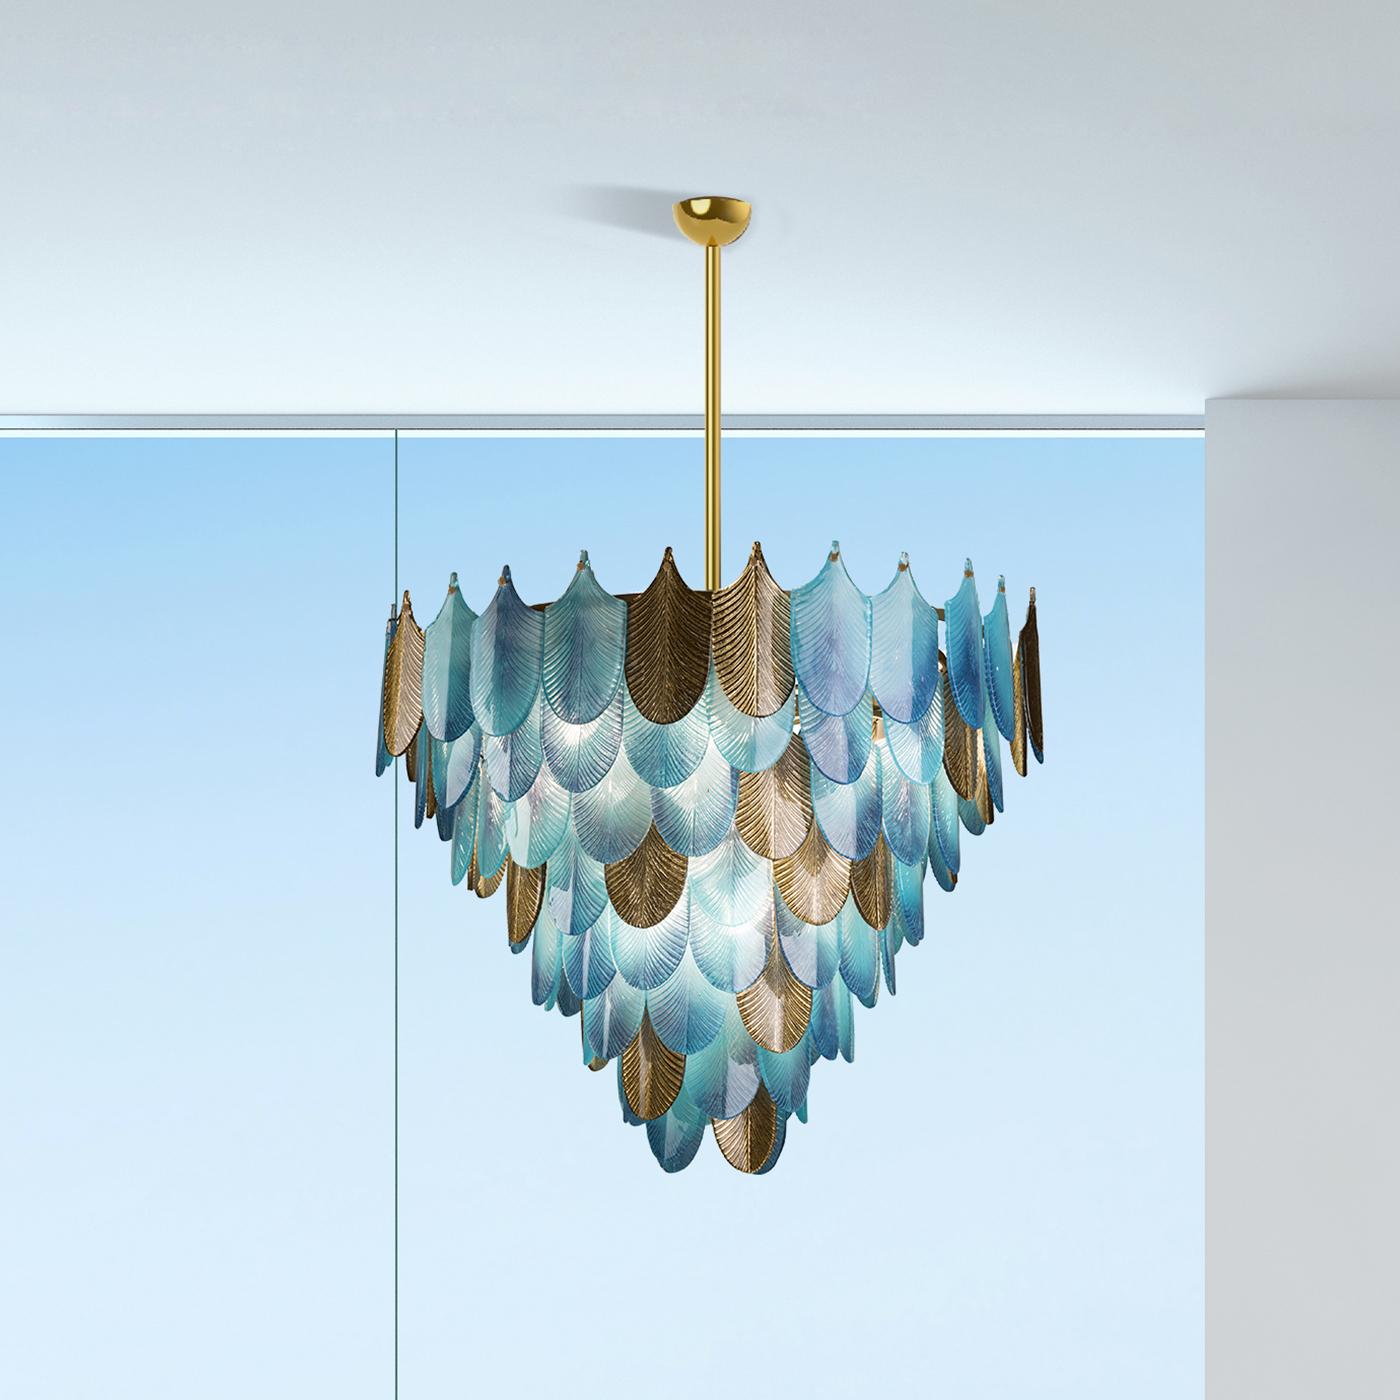 This chandelier is a work of functional art and a superb sculptural accent for a refined home, part of the Home Couture collection. Its structure in brass supports a myriad of elements evoking the silhouette and texture of peacock feathers and made